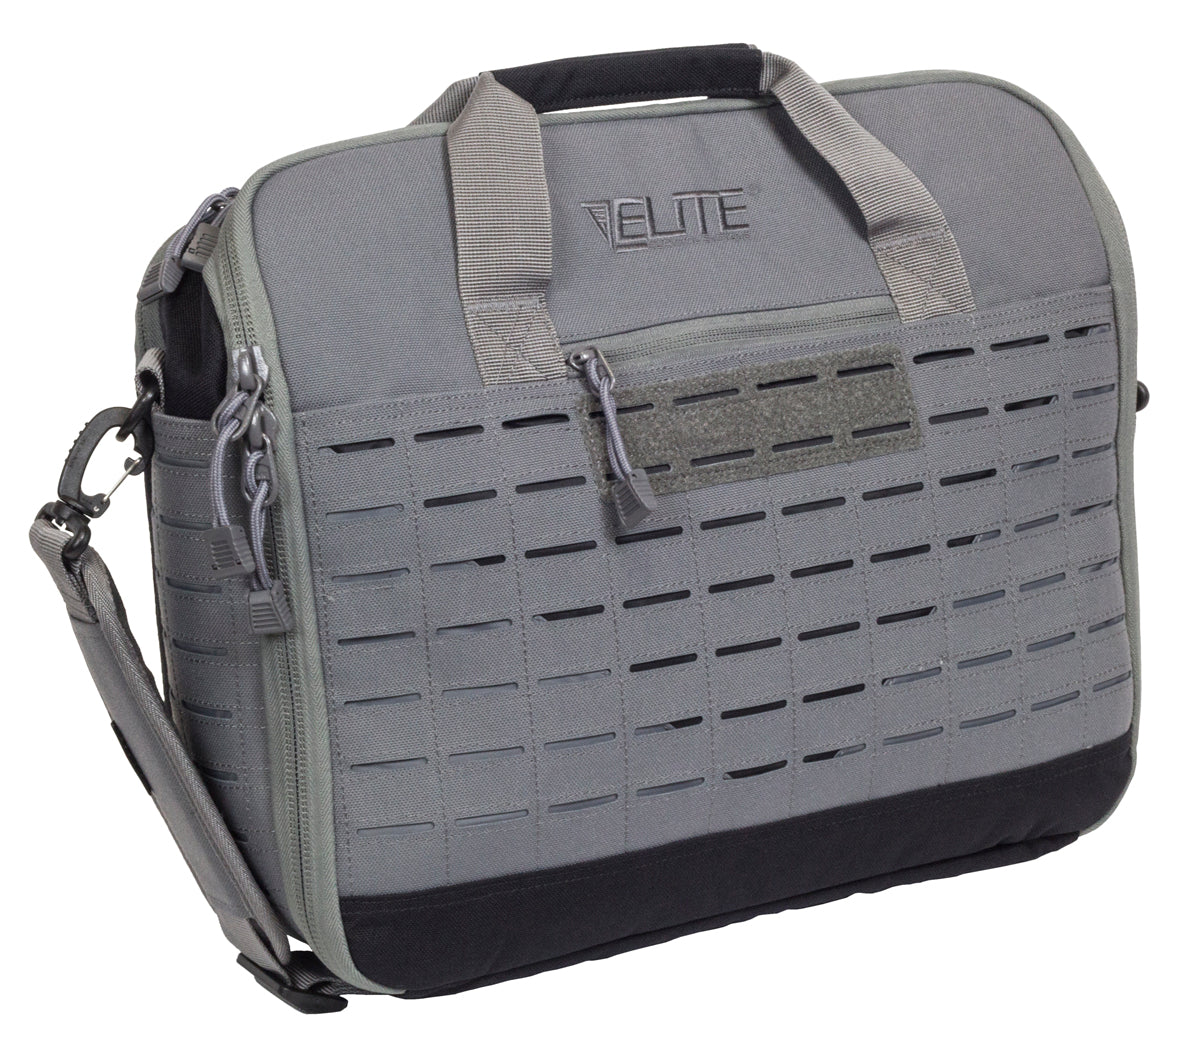 CCW messenger bag in wolf gray color, exterior image